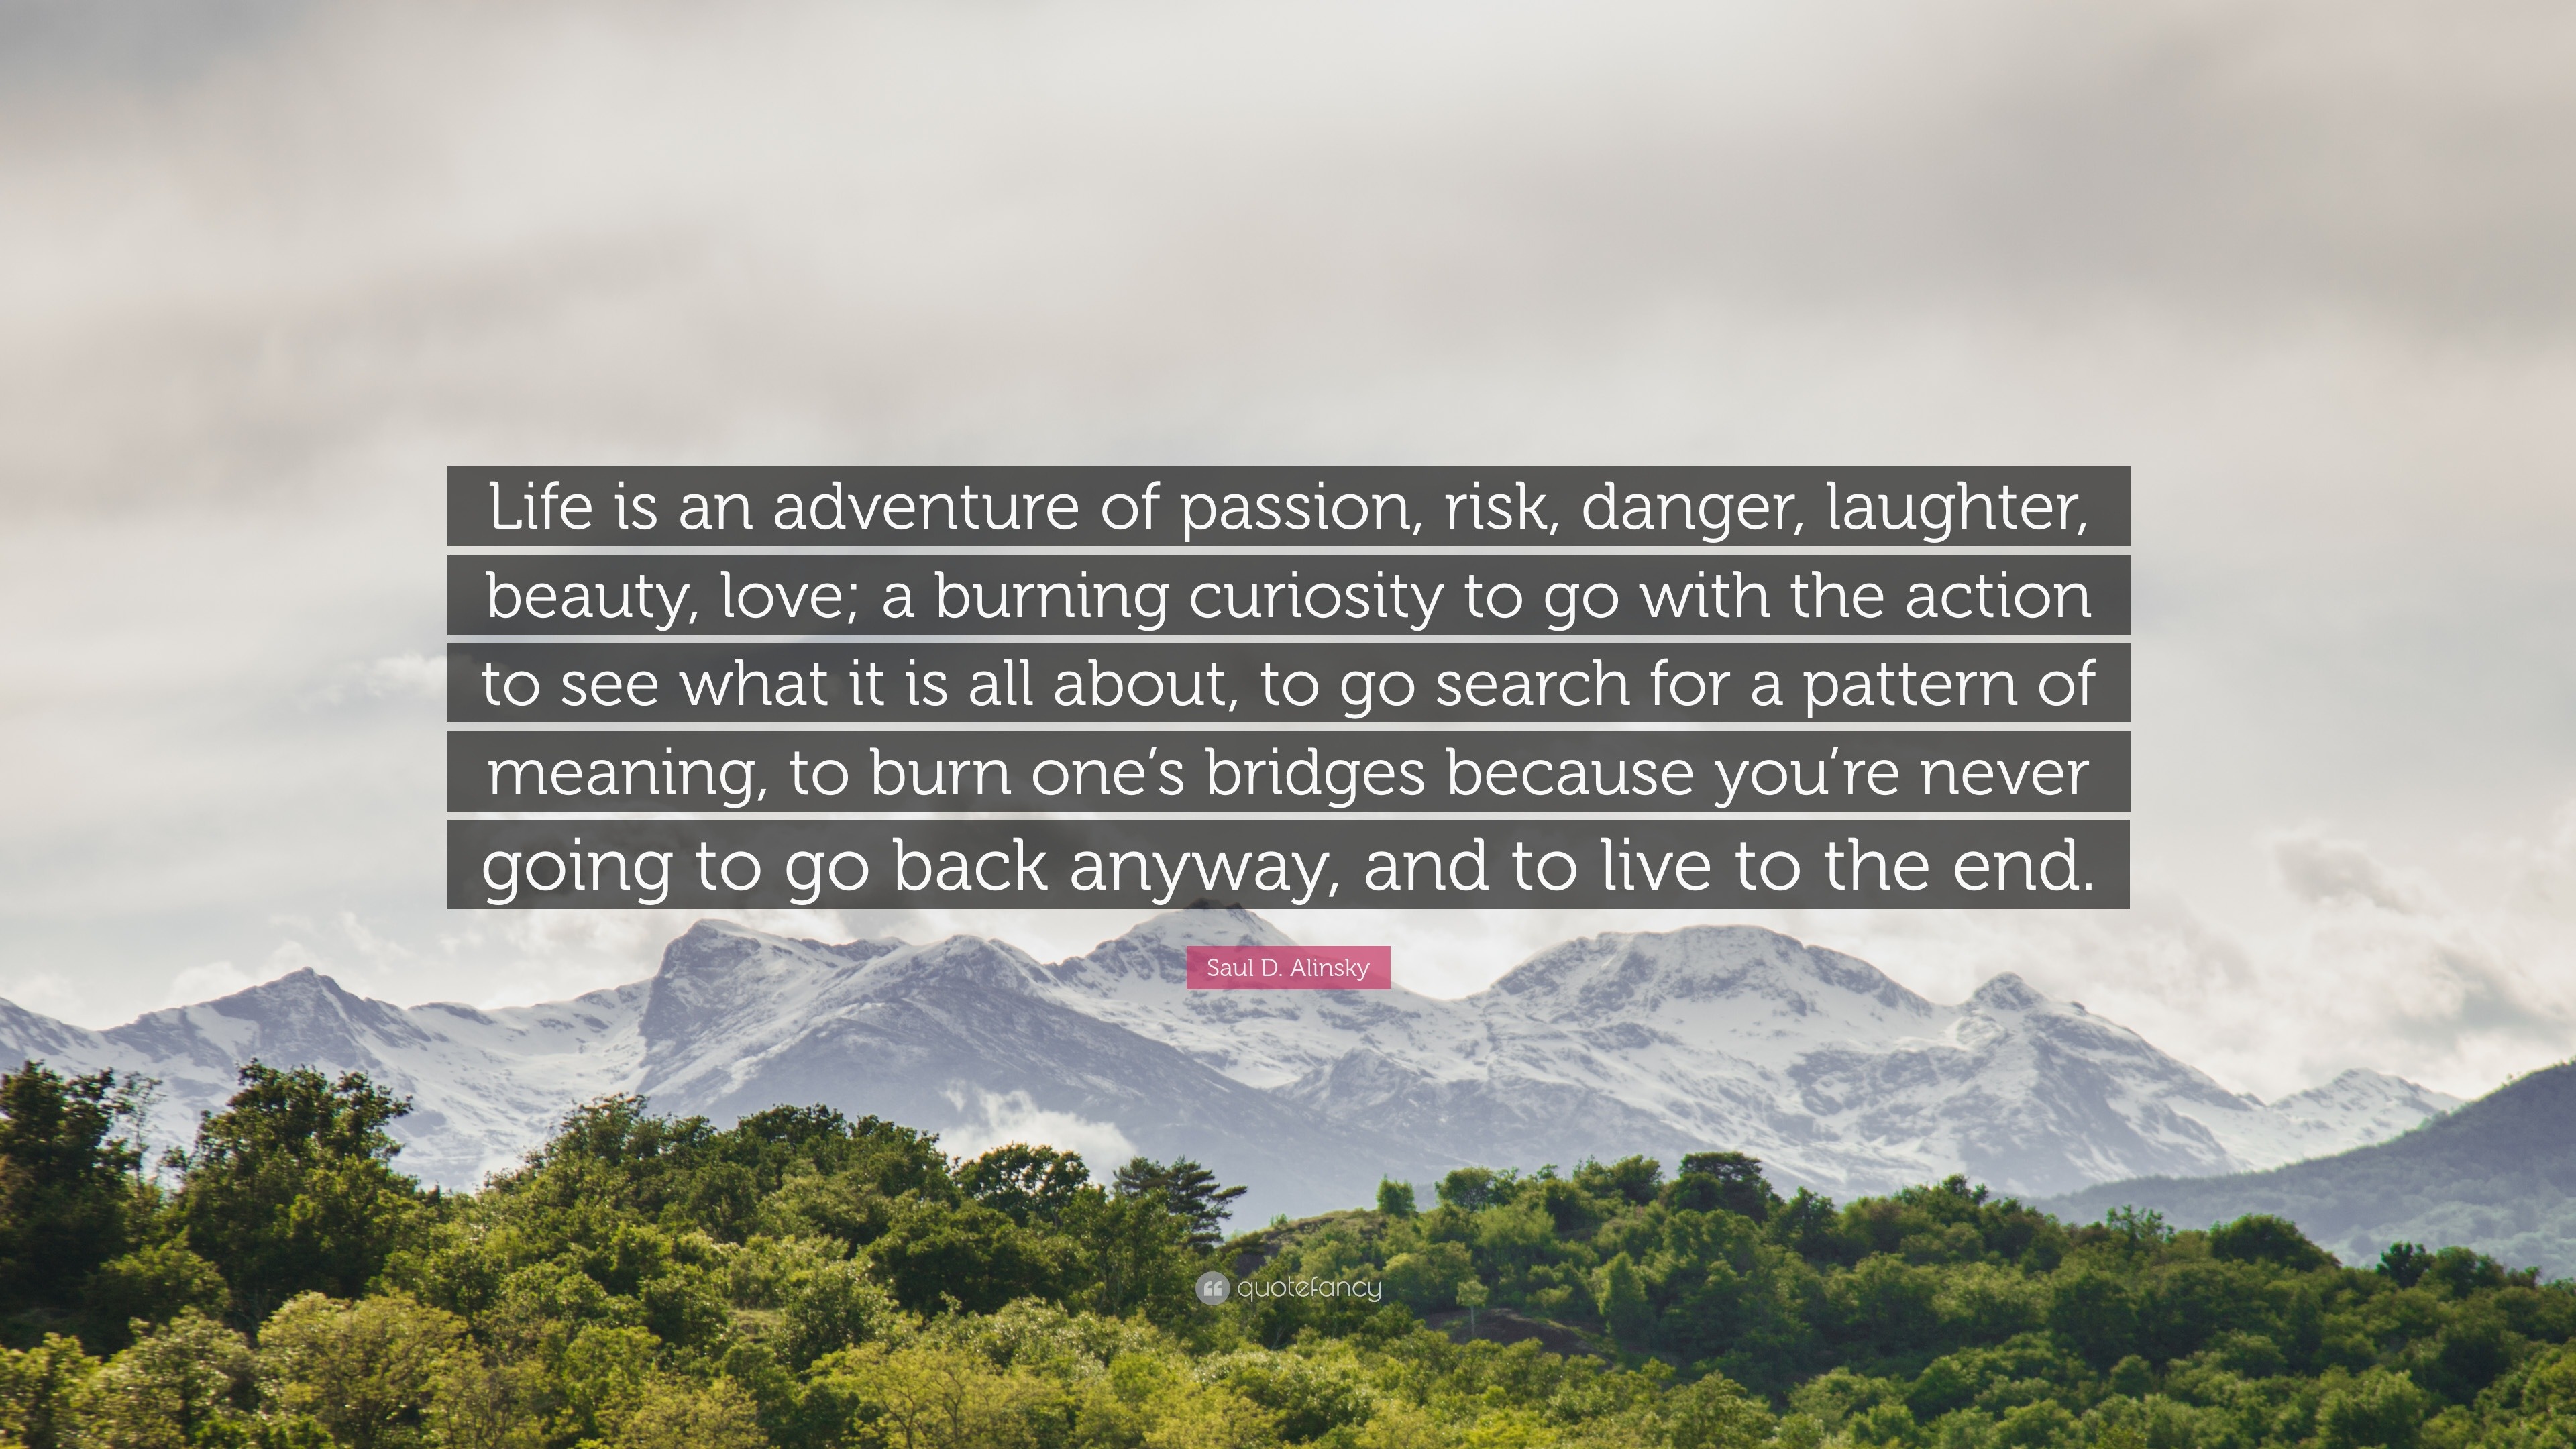 Saul D Alinsky Quote “Life is an adventure of passion risk